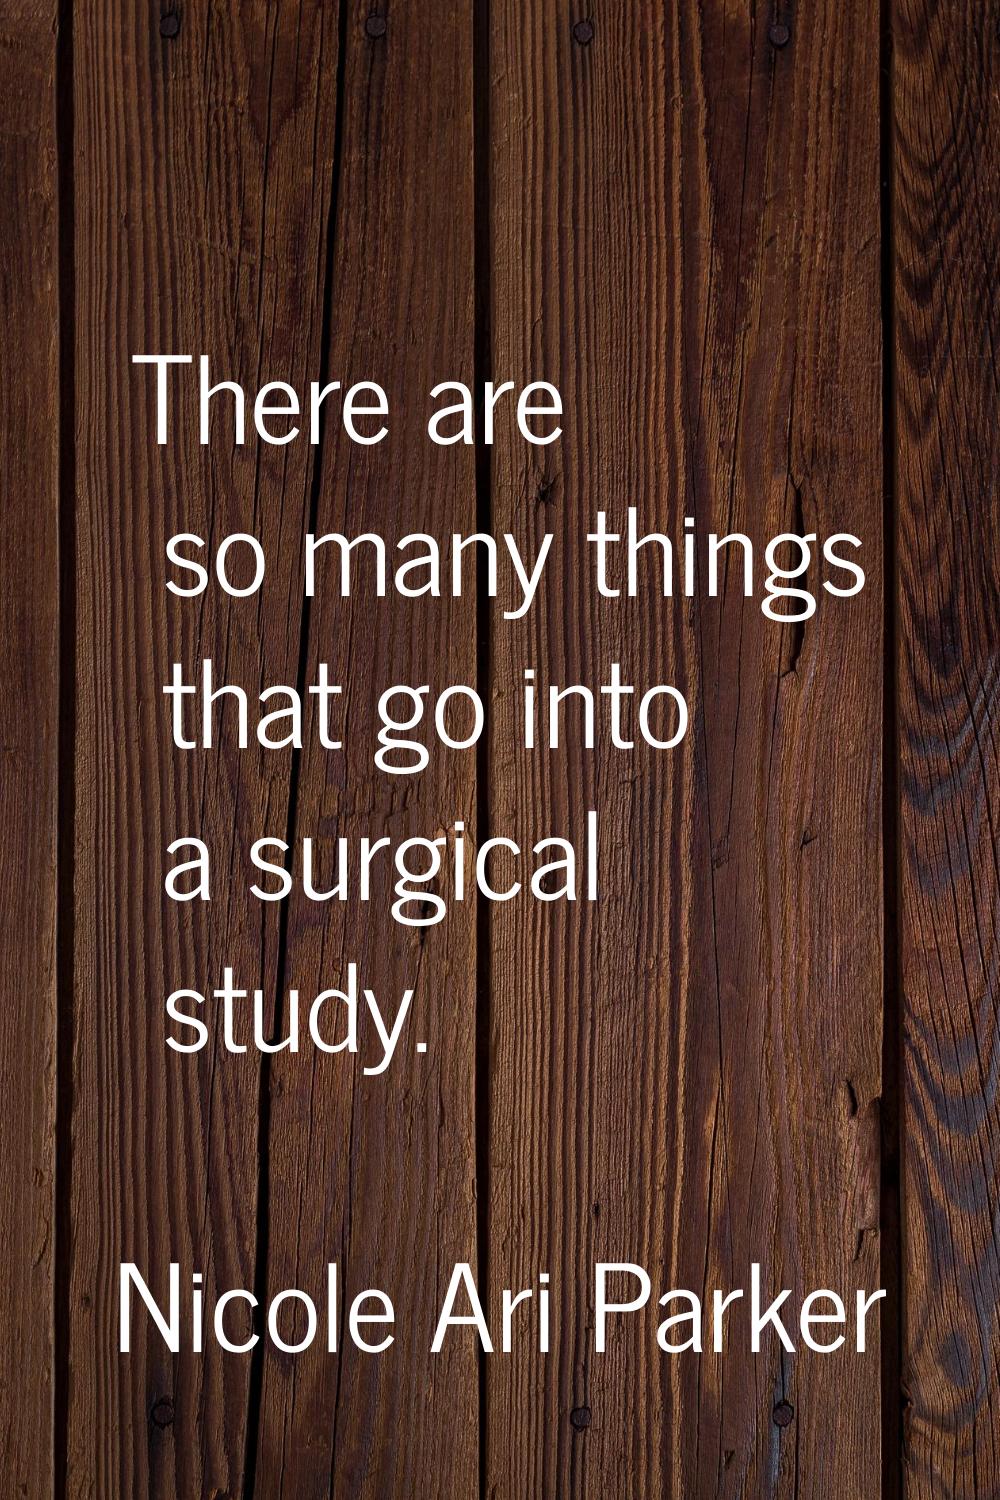 There are so many things that go into a surgical study.